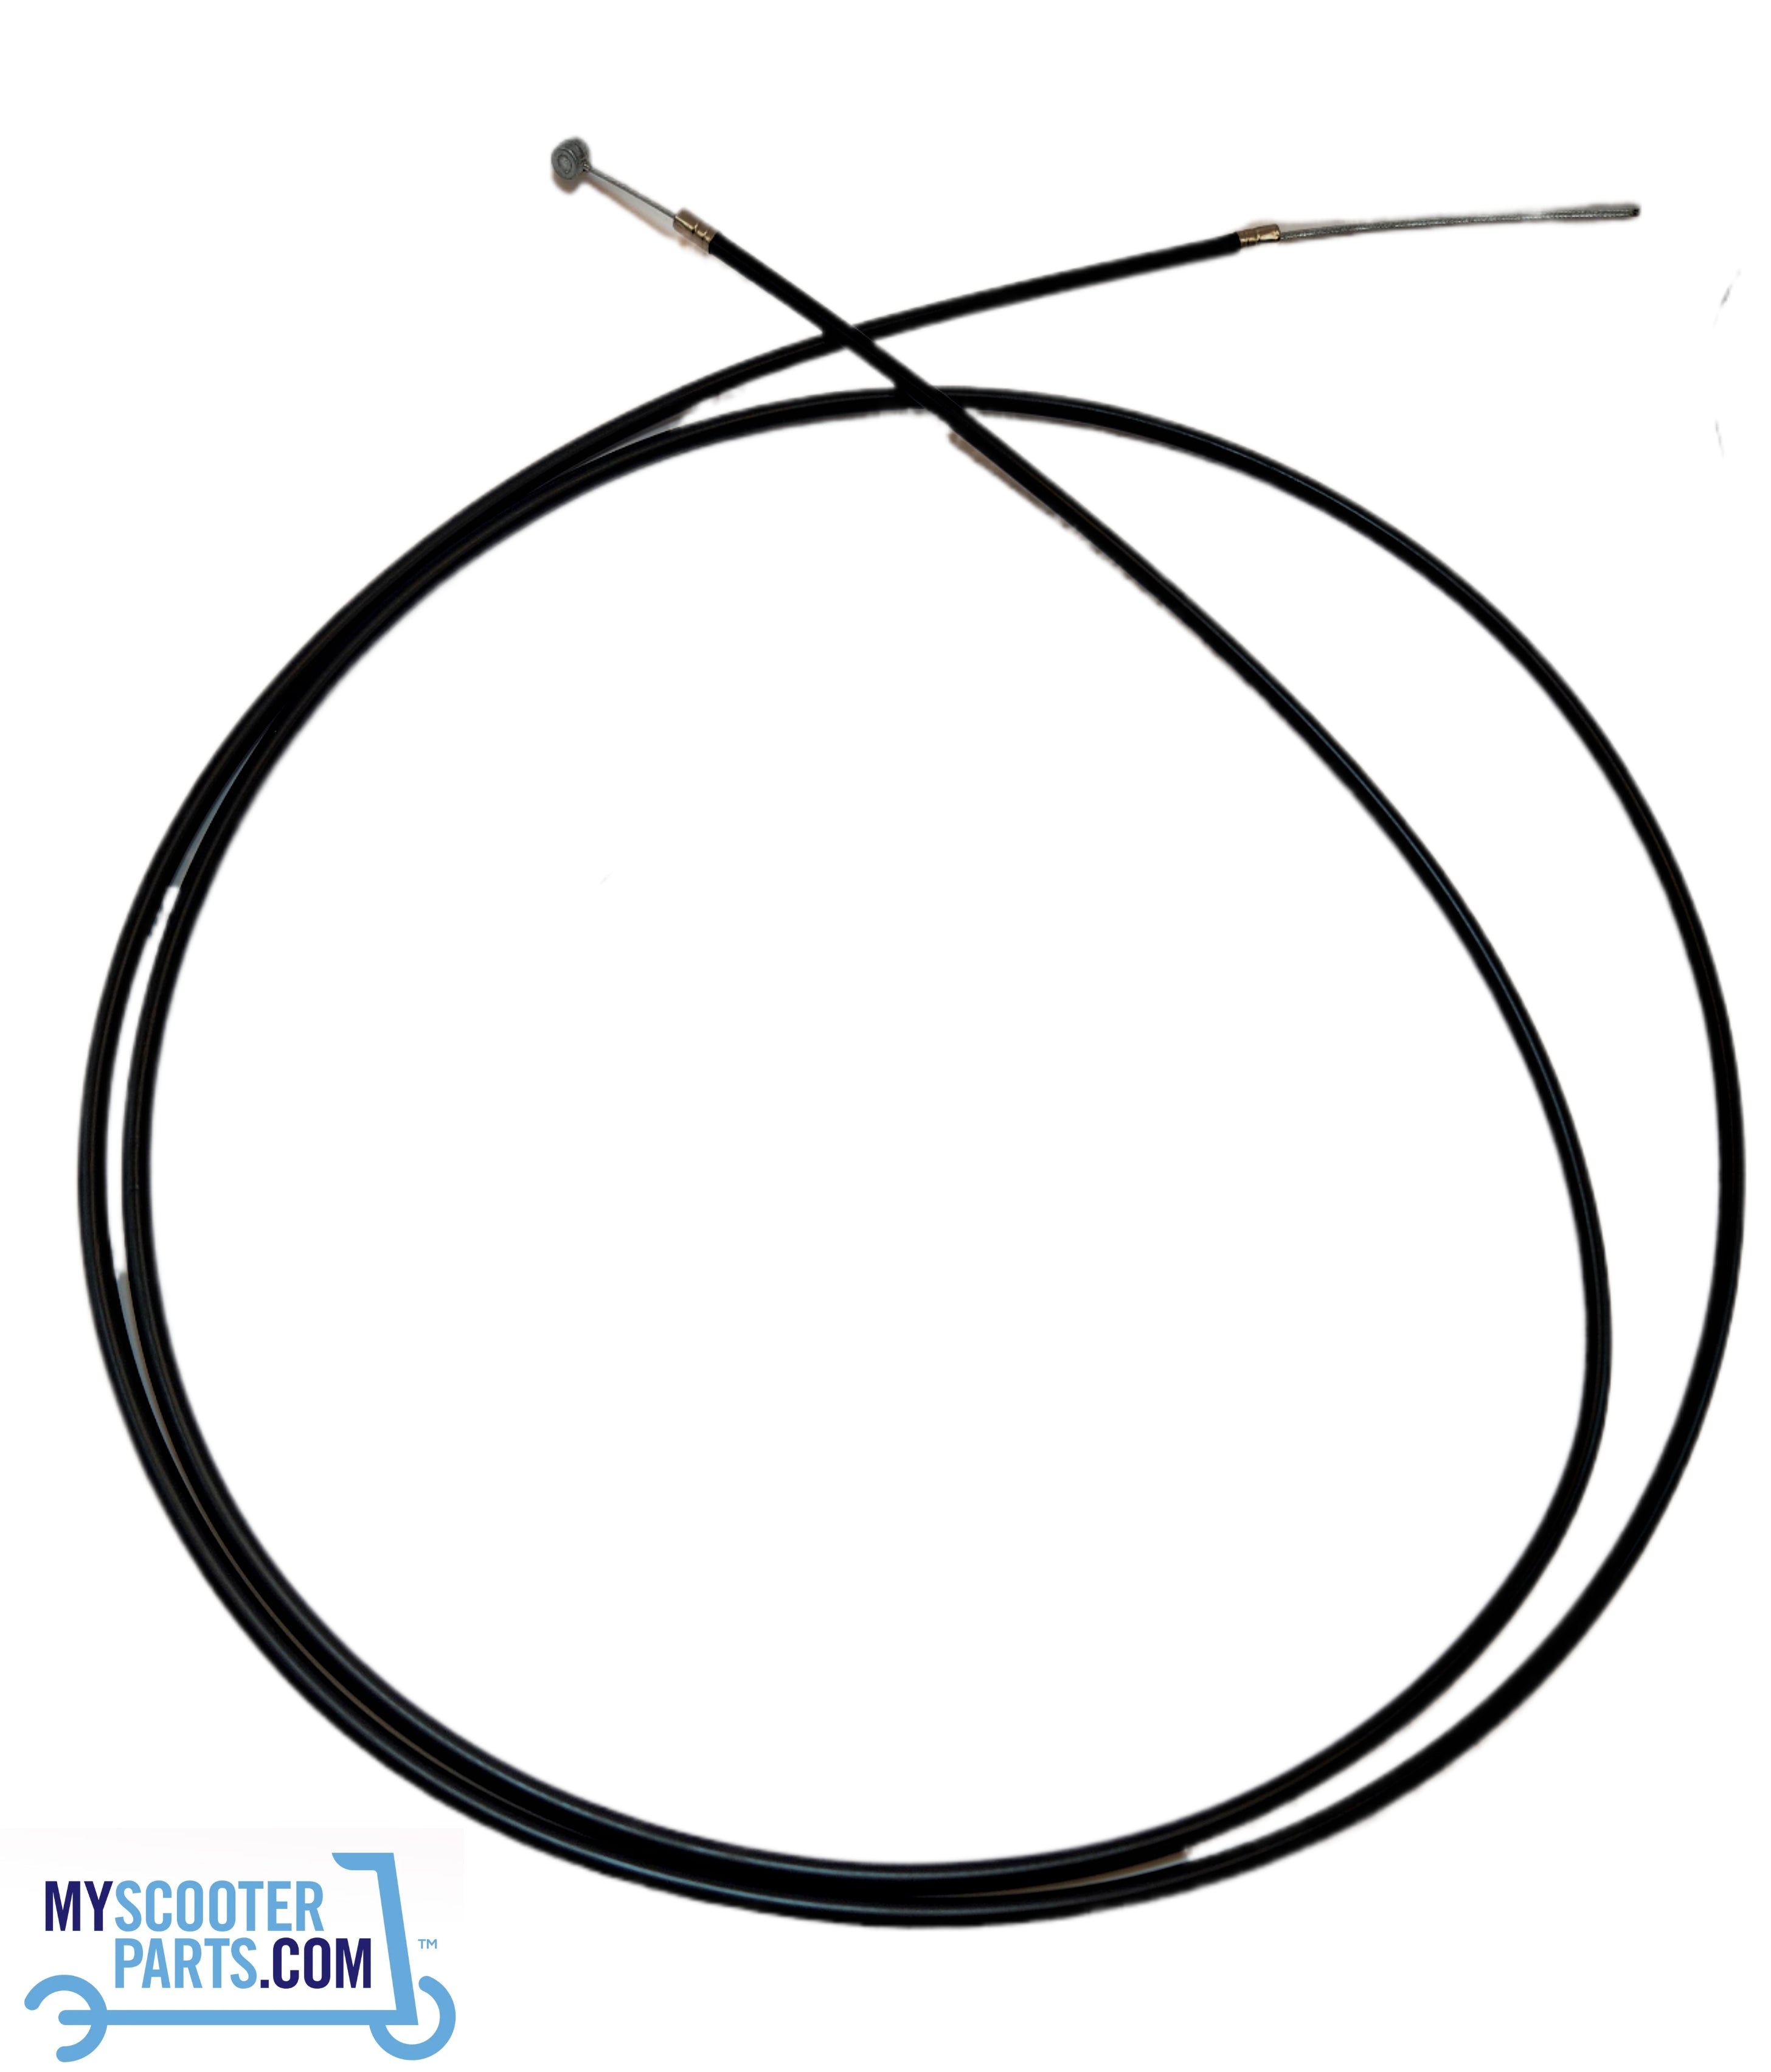 Mercane | G2 Pro G2 Max | Brake Cable (front)